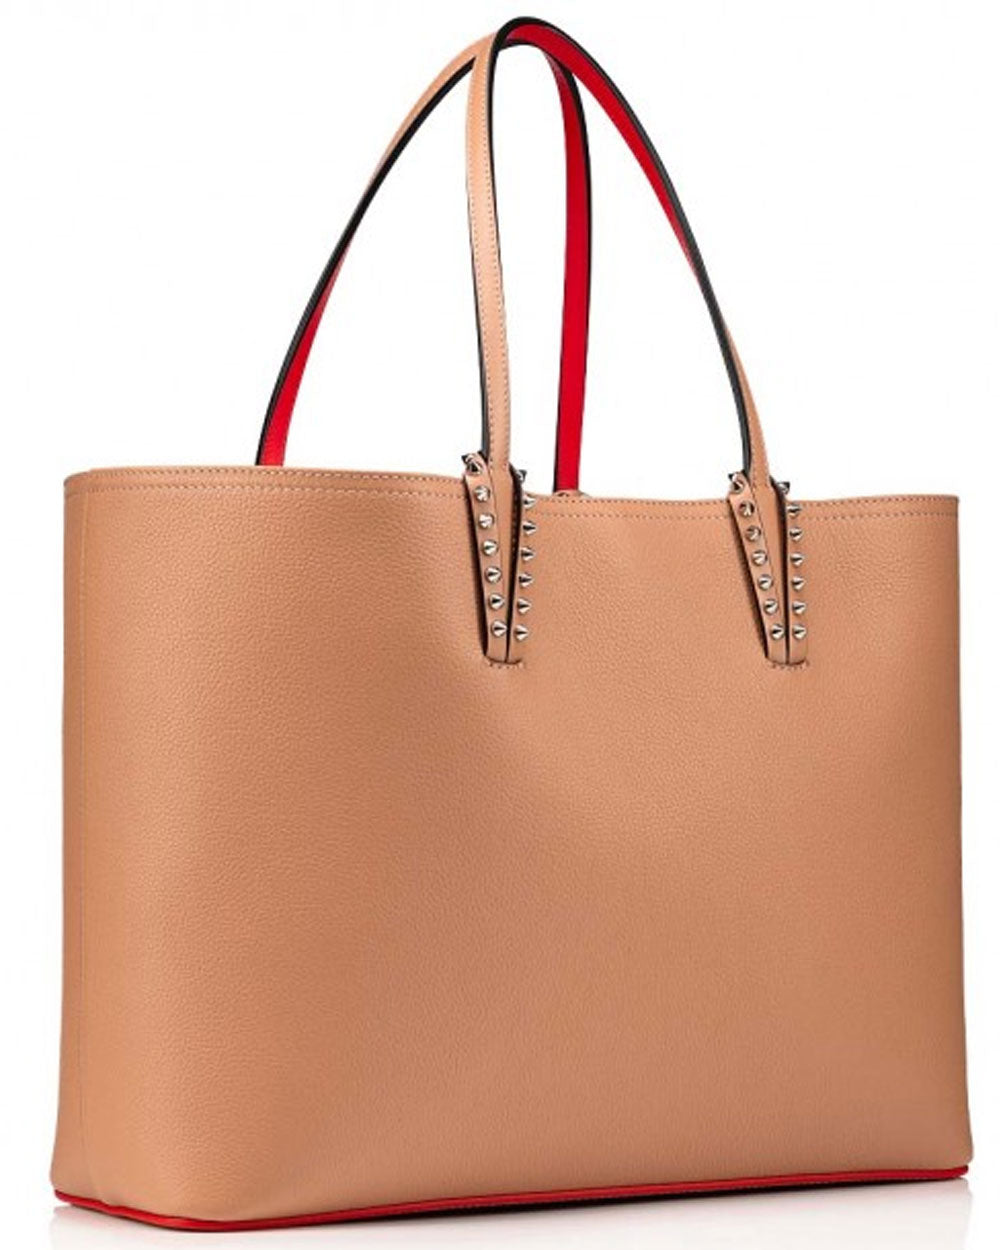 Cabata East West Tote in Nude